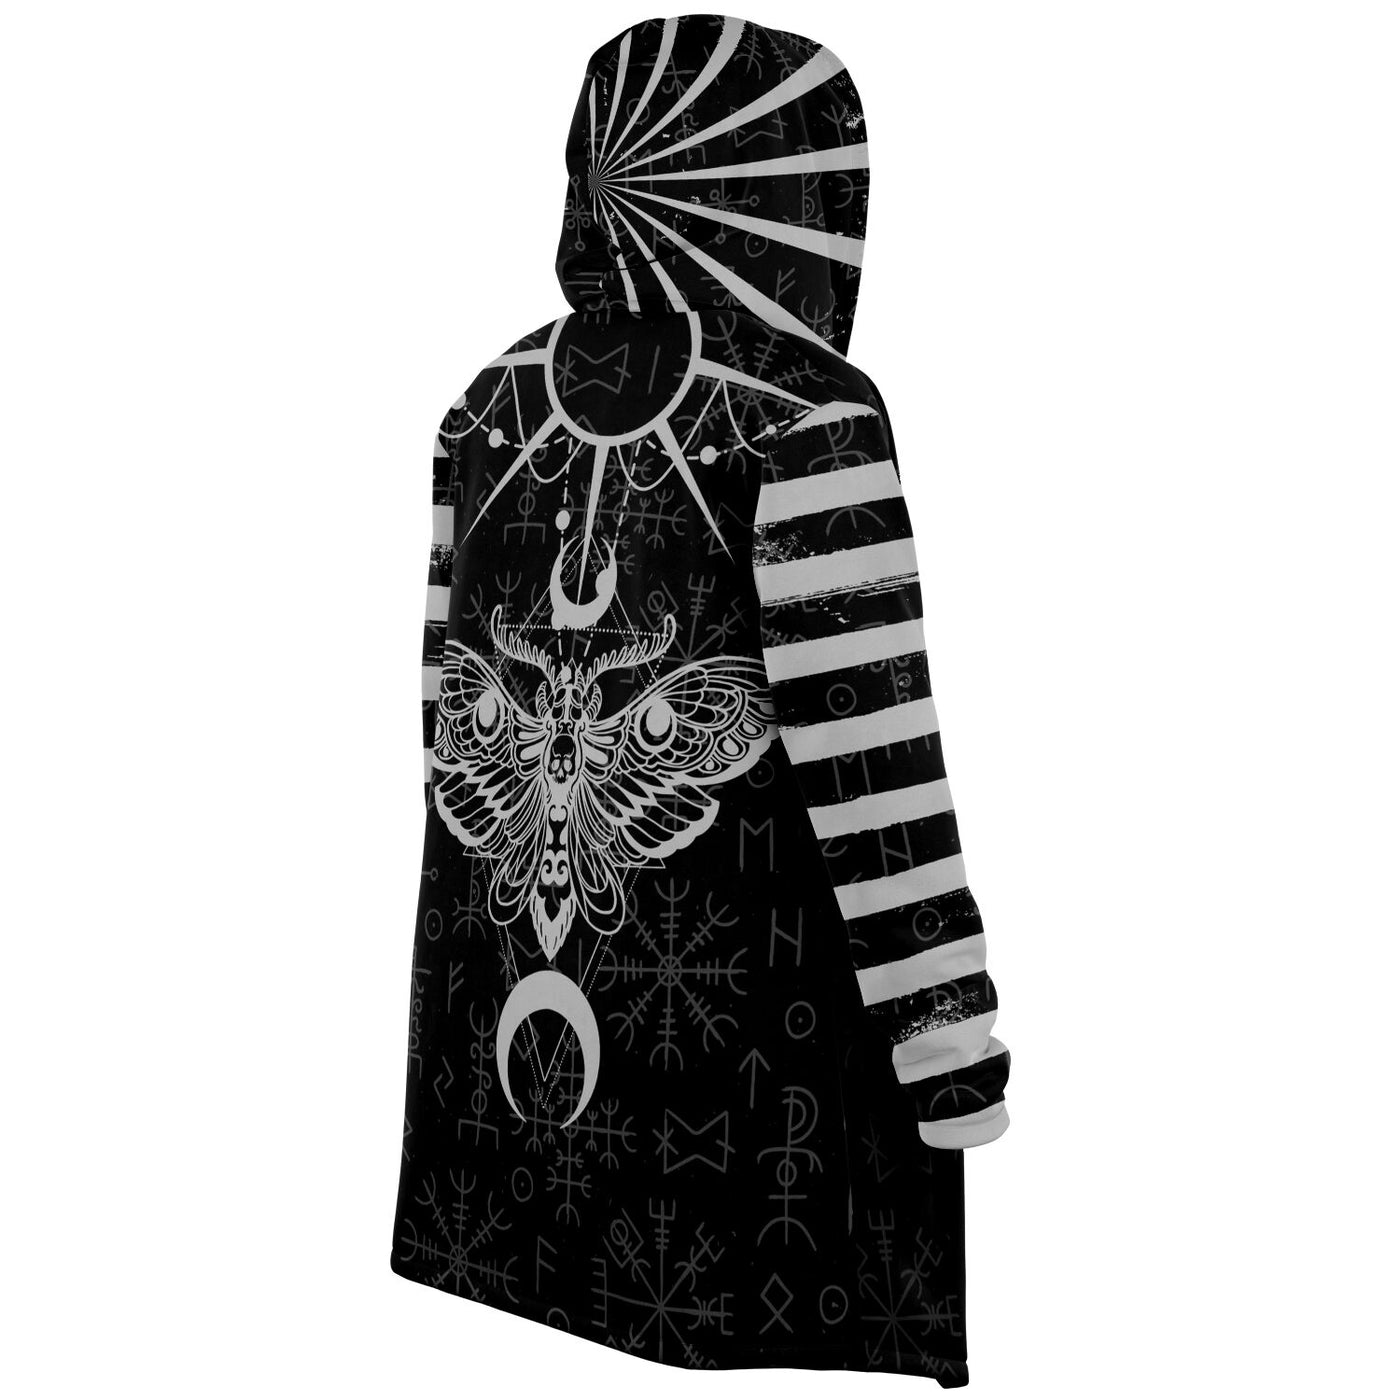 Pastel Goth Witchy Gray | Hooded Cloak